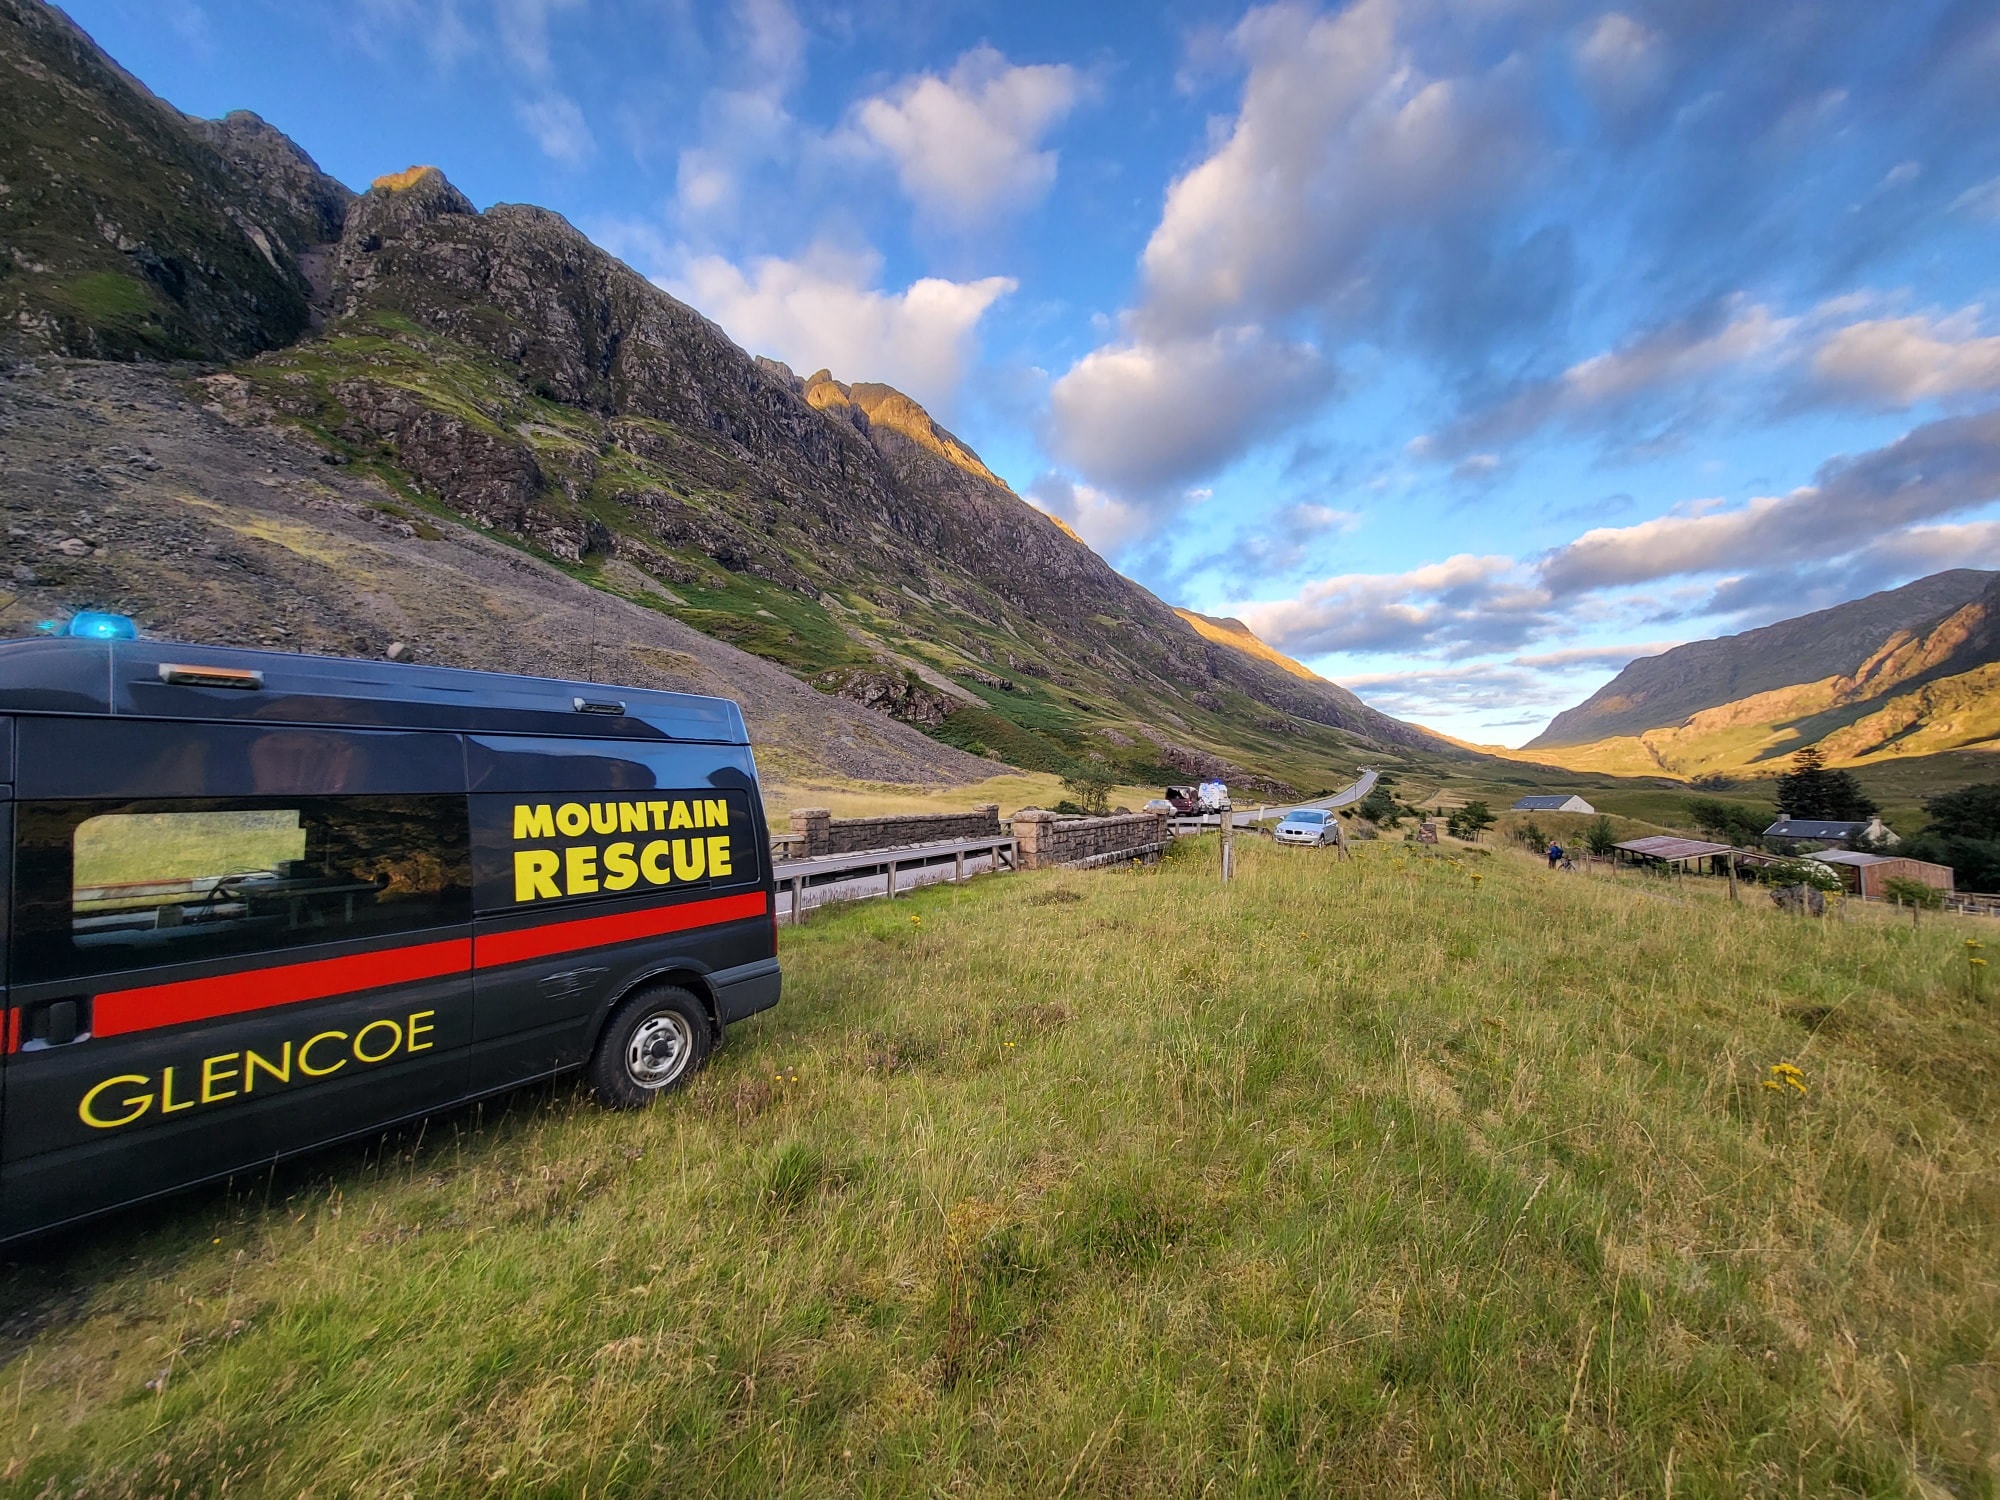 Glencoe Mountain Rescue Team was requested to assist as the remains, believed to be Alan Taylor's, were in an awkward gully high in the glen requiring specialist mountaineering skills to safely access.